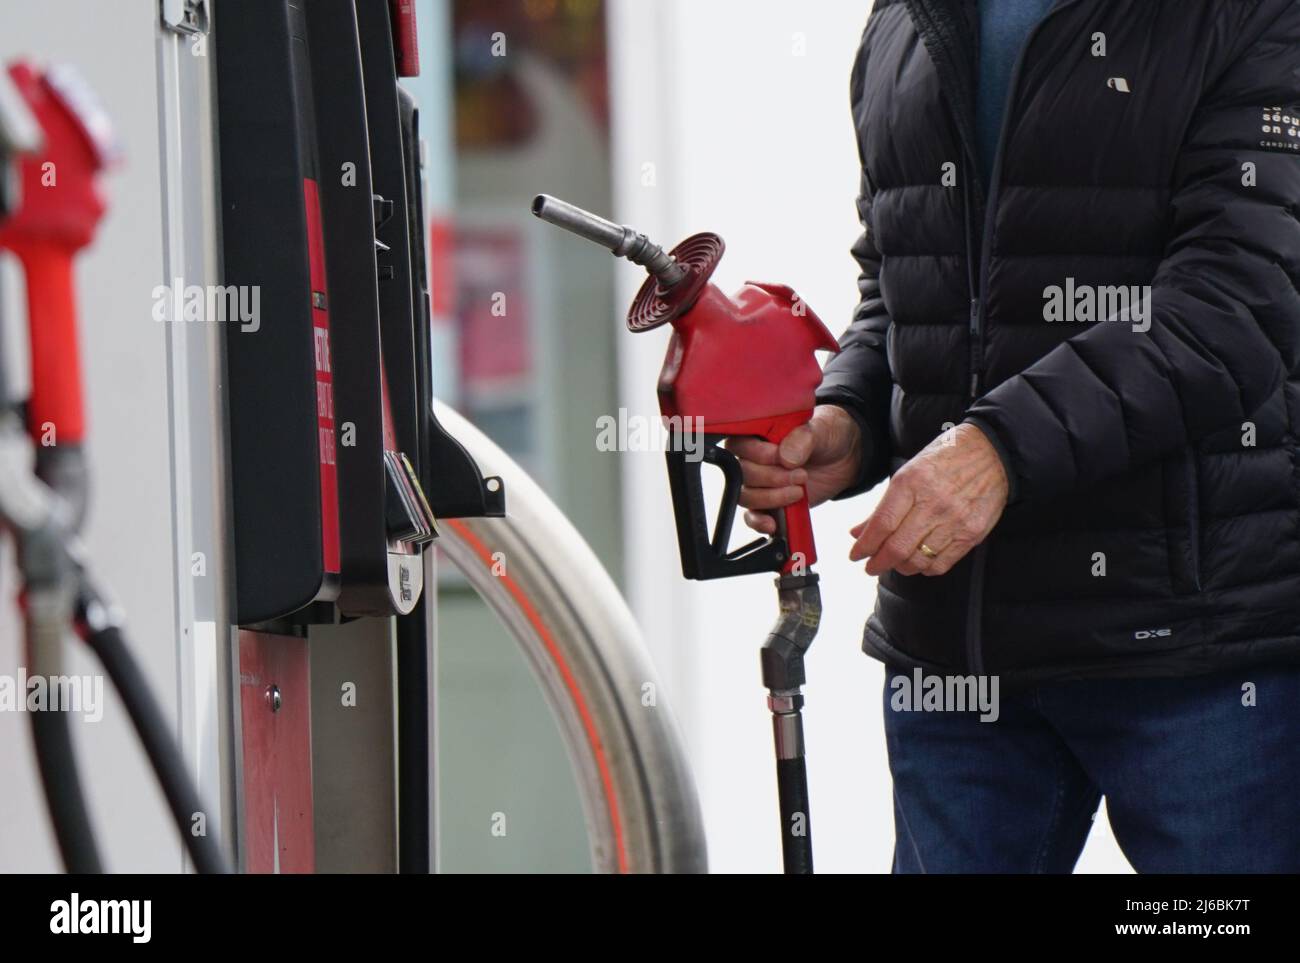 Man at a gas station filling up with petrol. Stock Photo